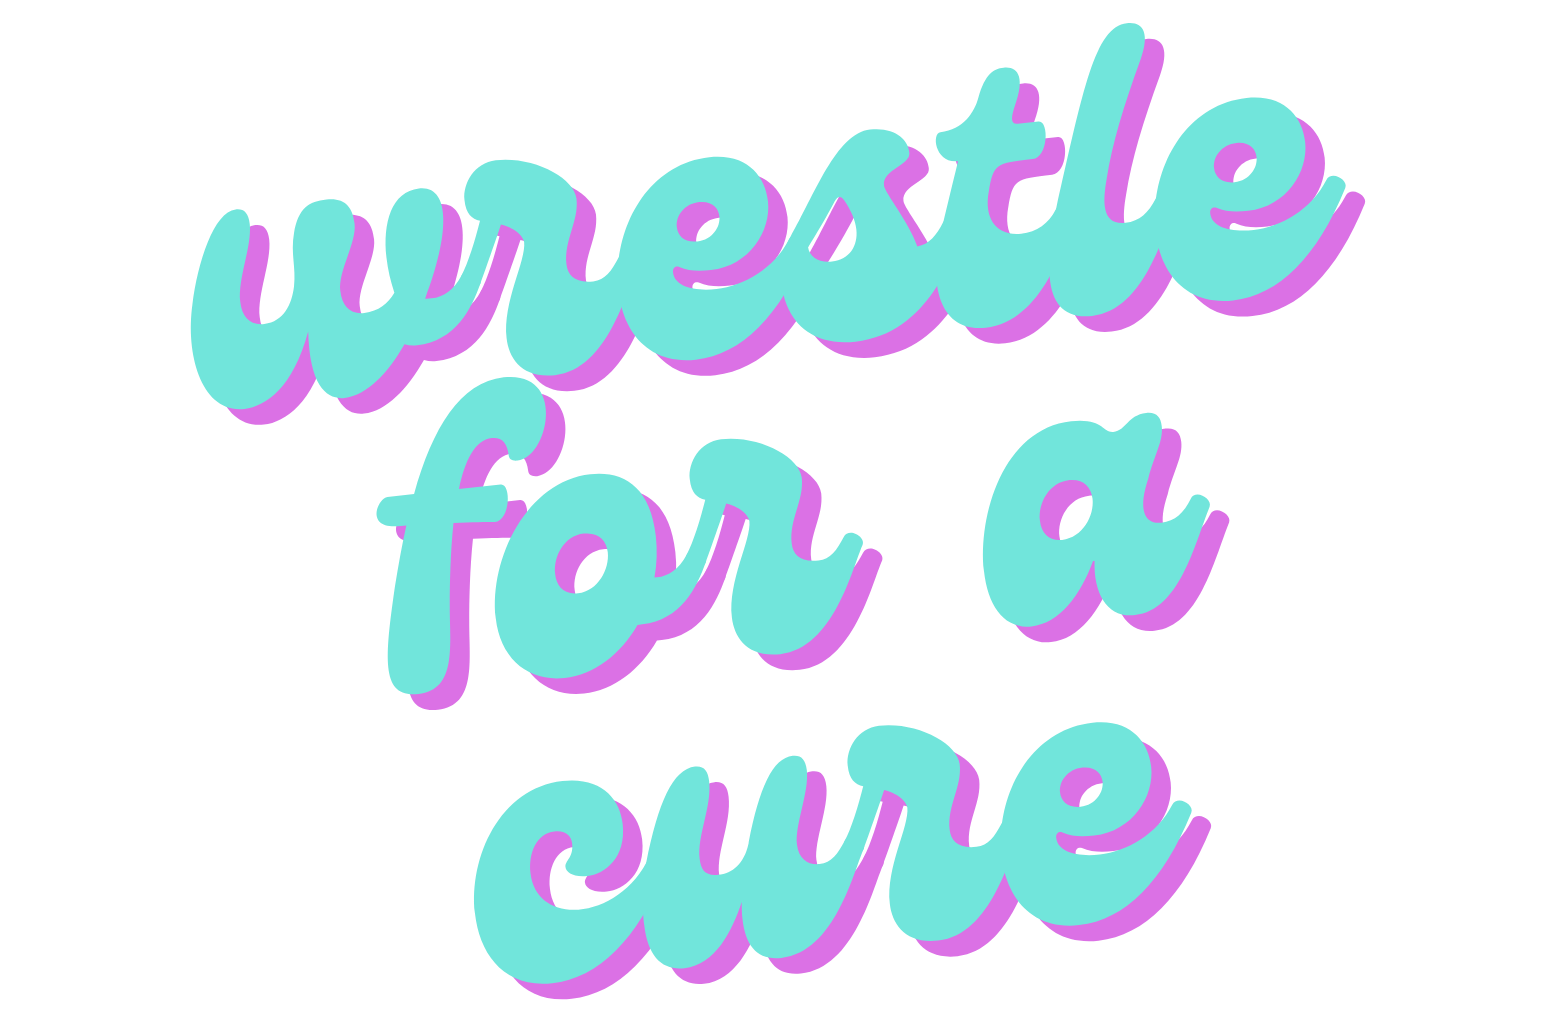 usa wrestling to cure cancer